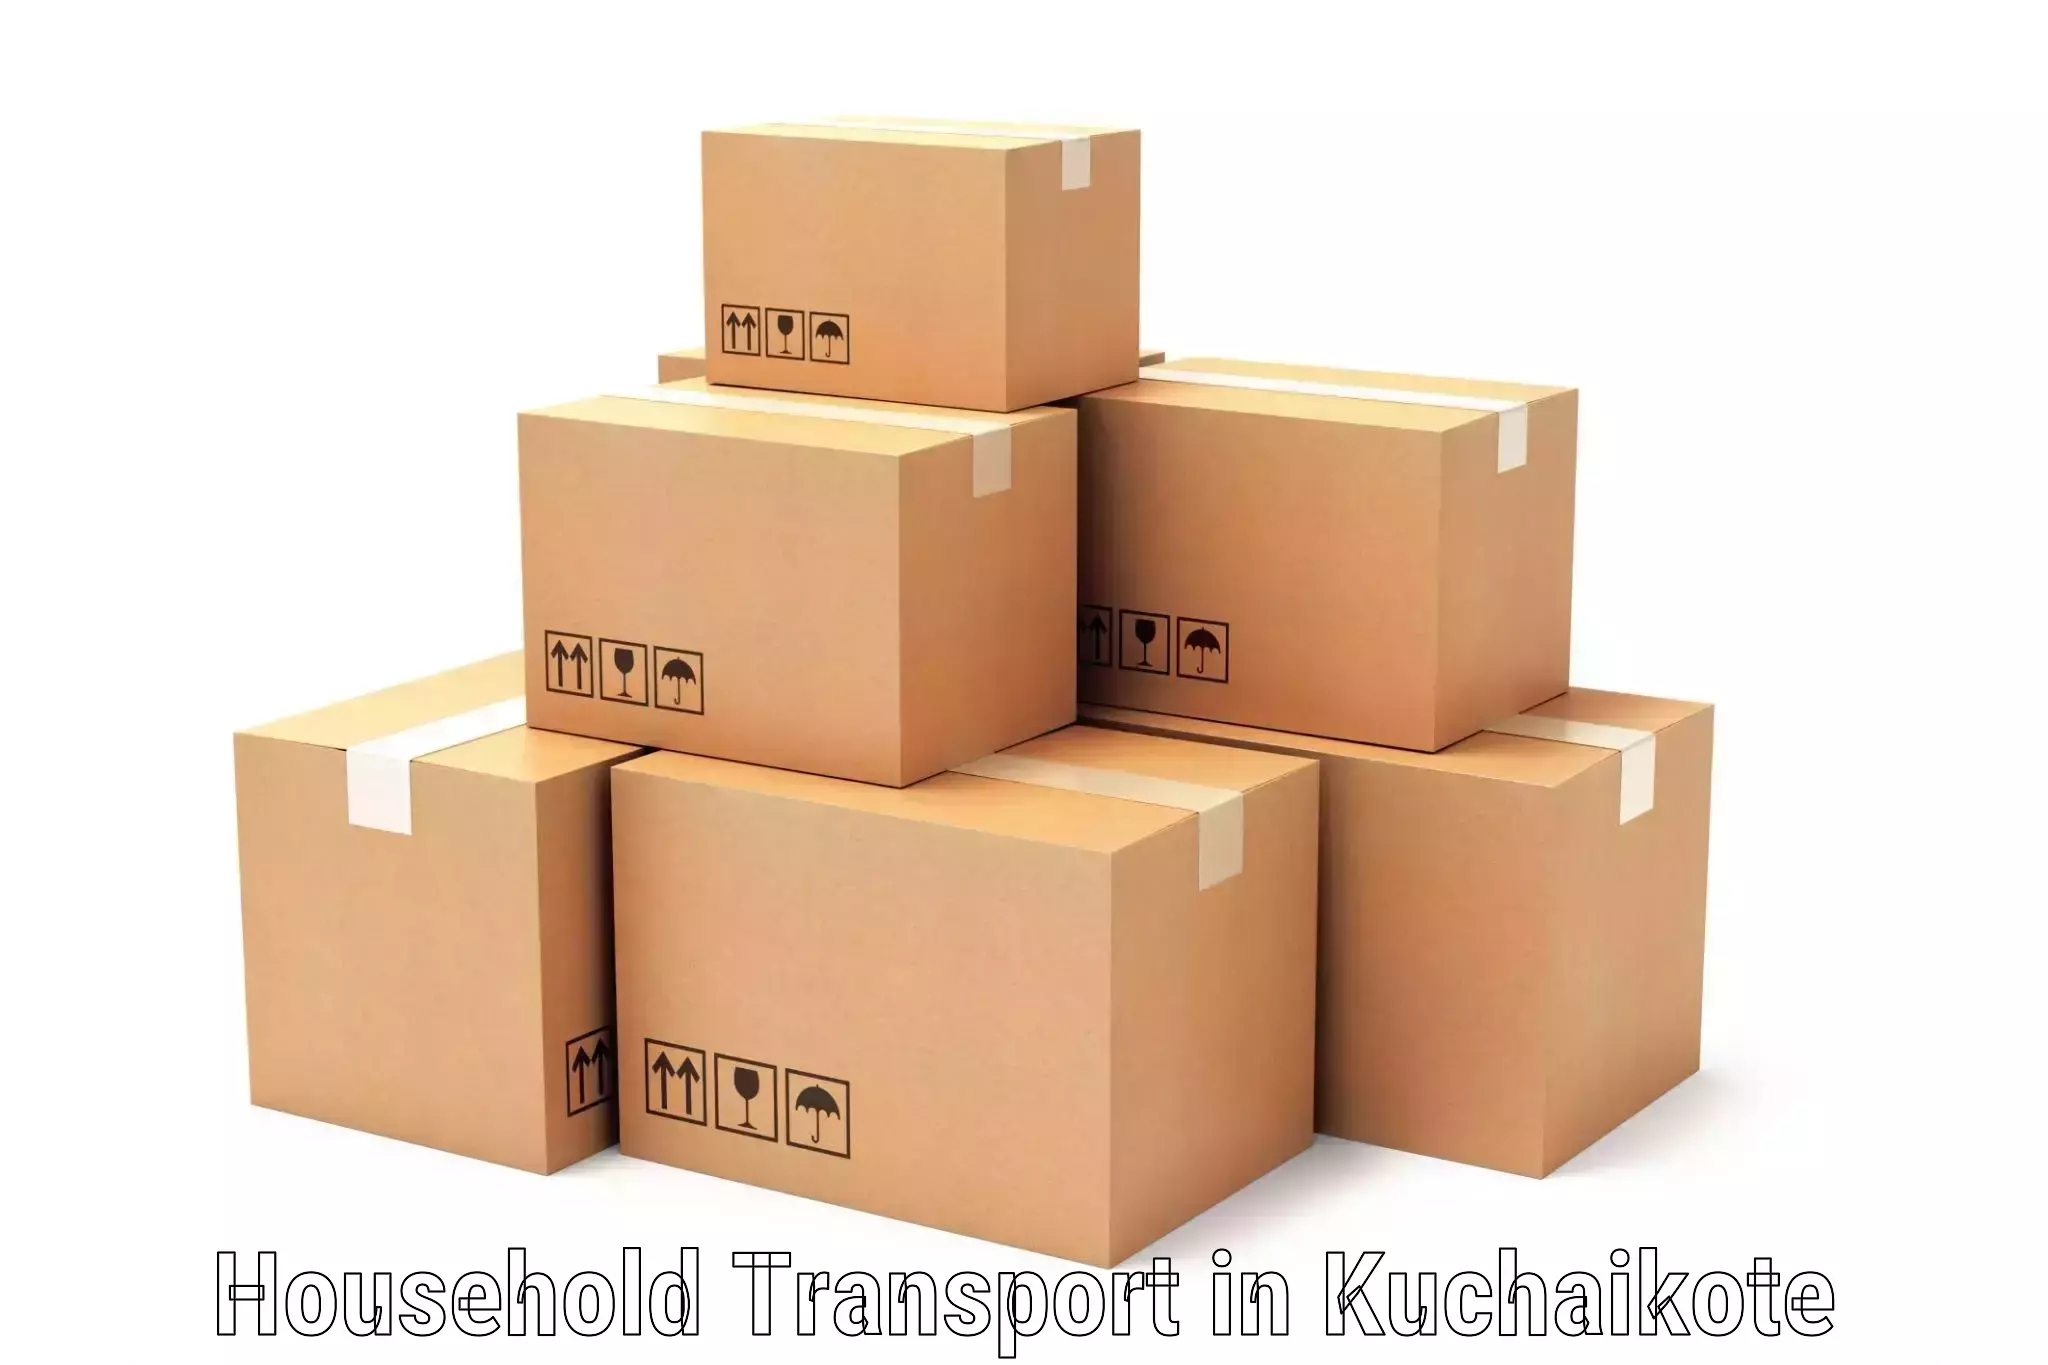 Professional home goods transport in Kuchaikote